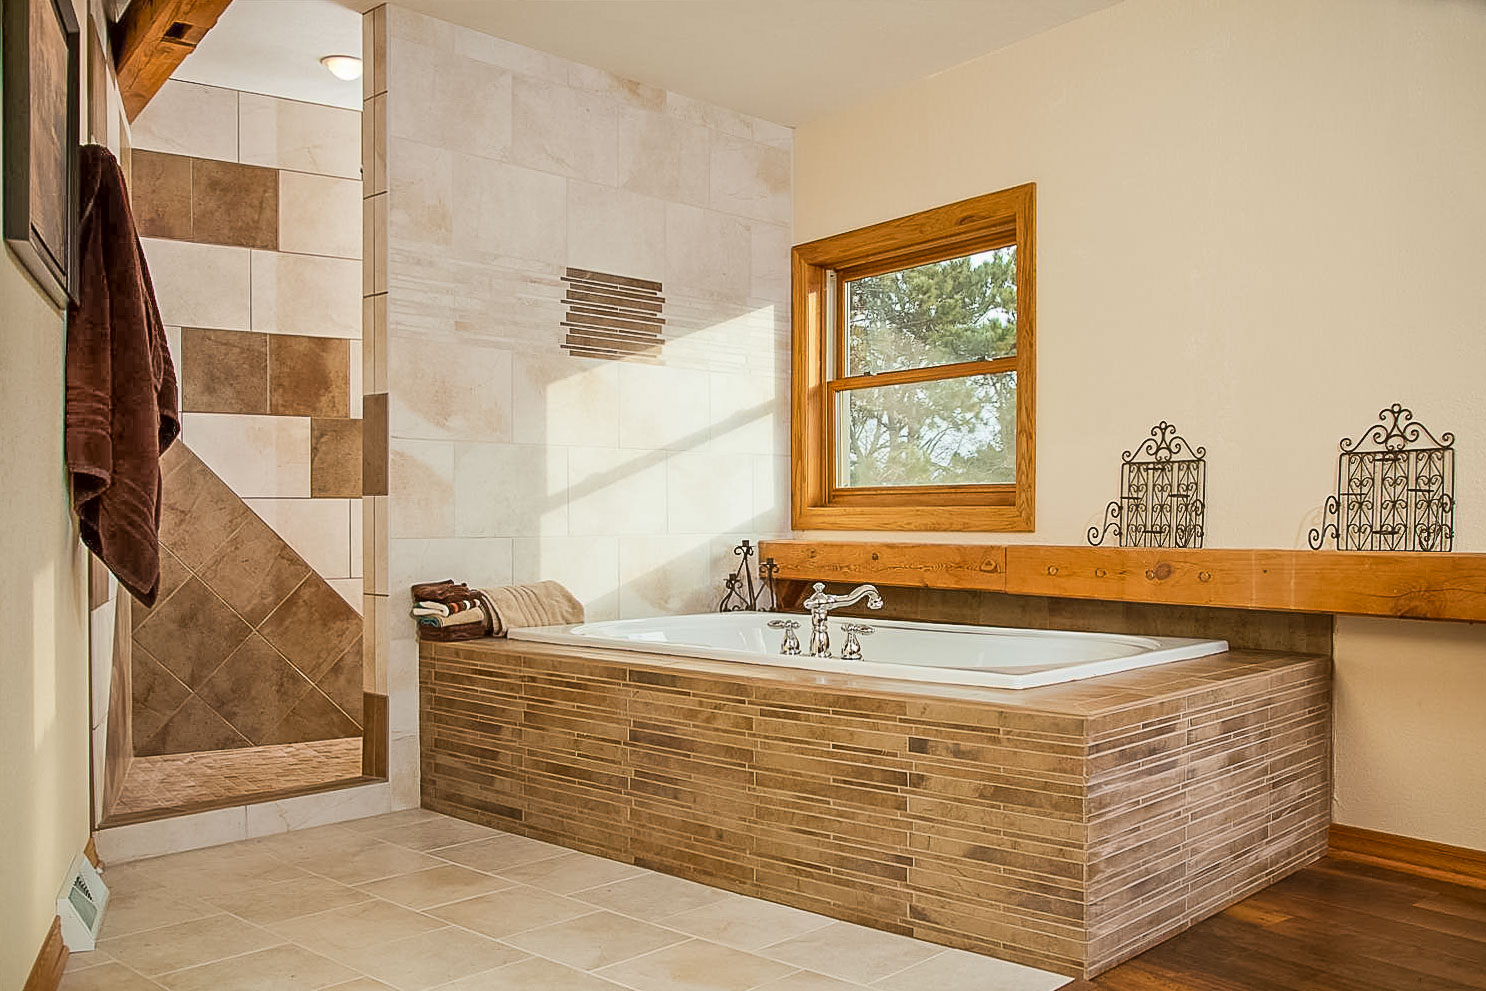 Let Showering Be Less Expensive And More Luxurious